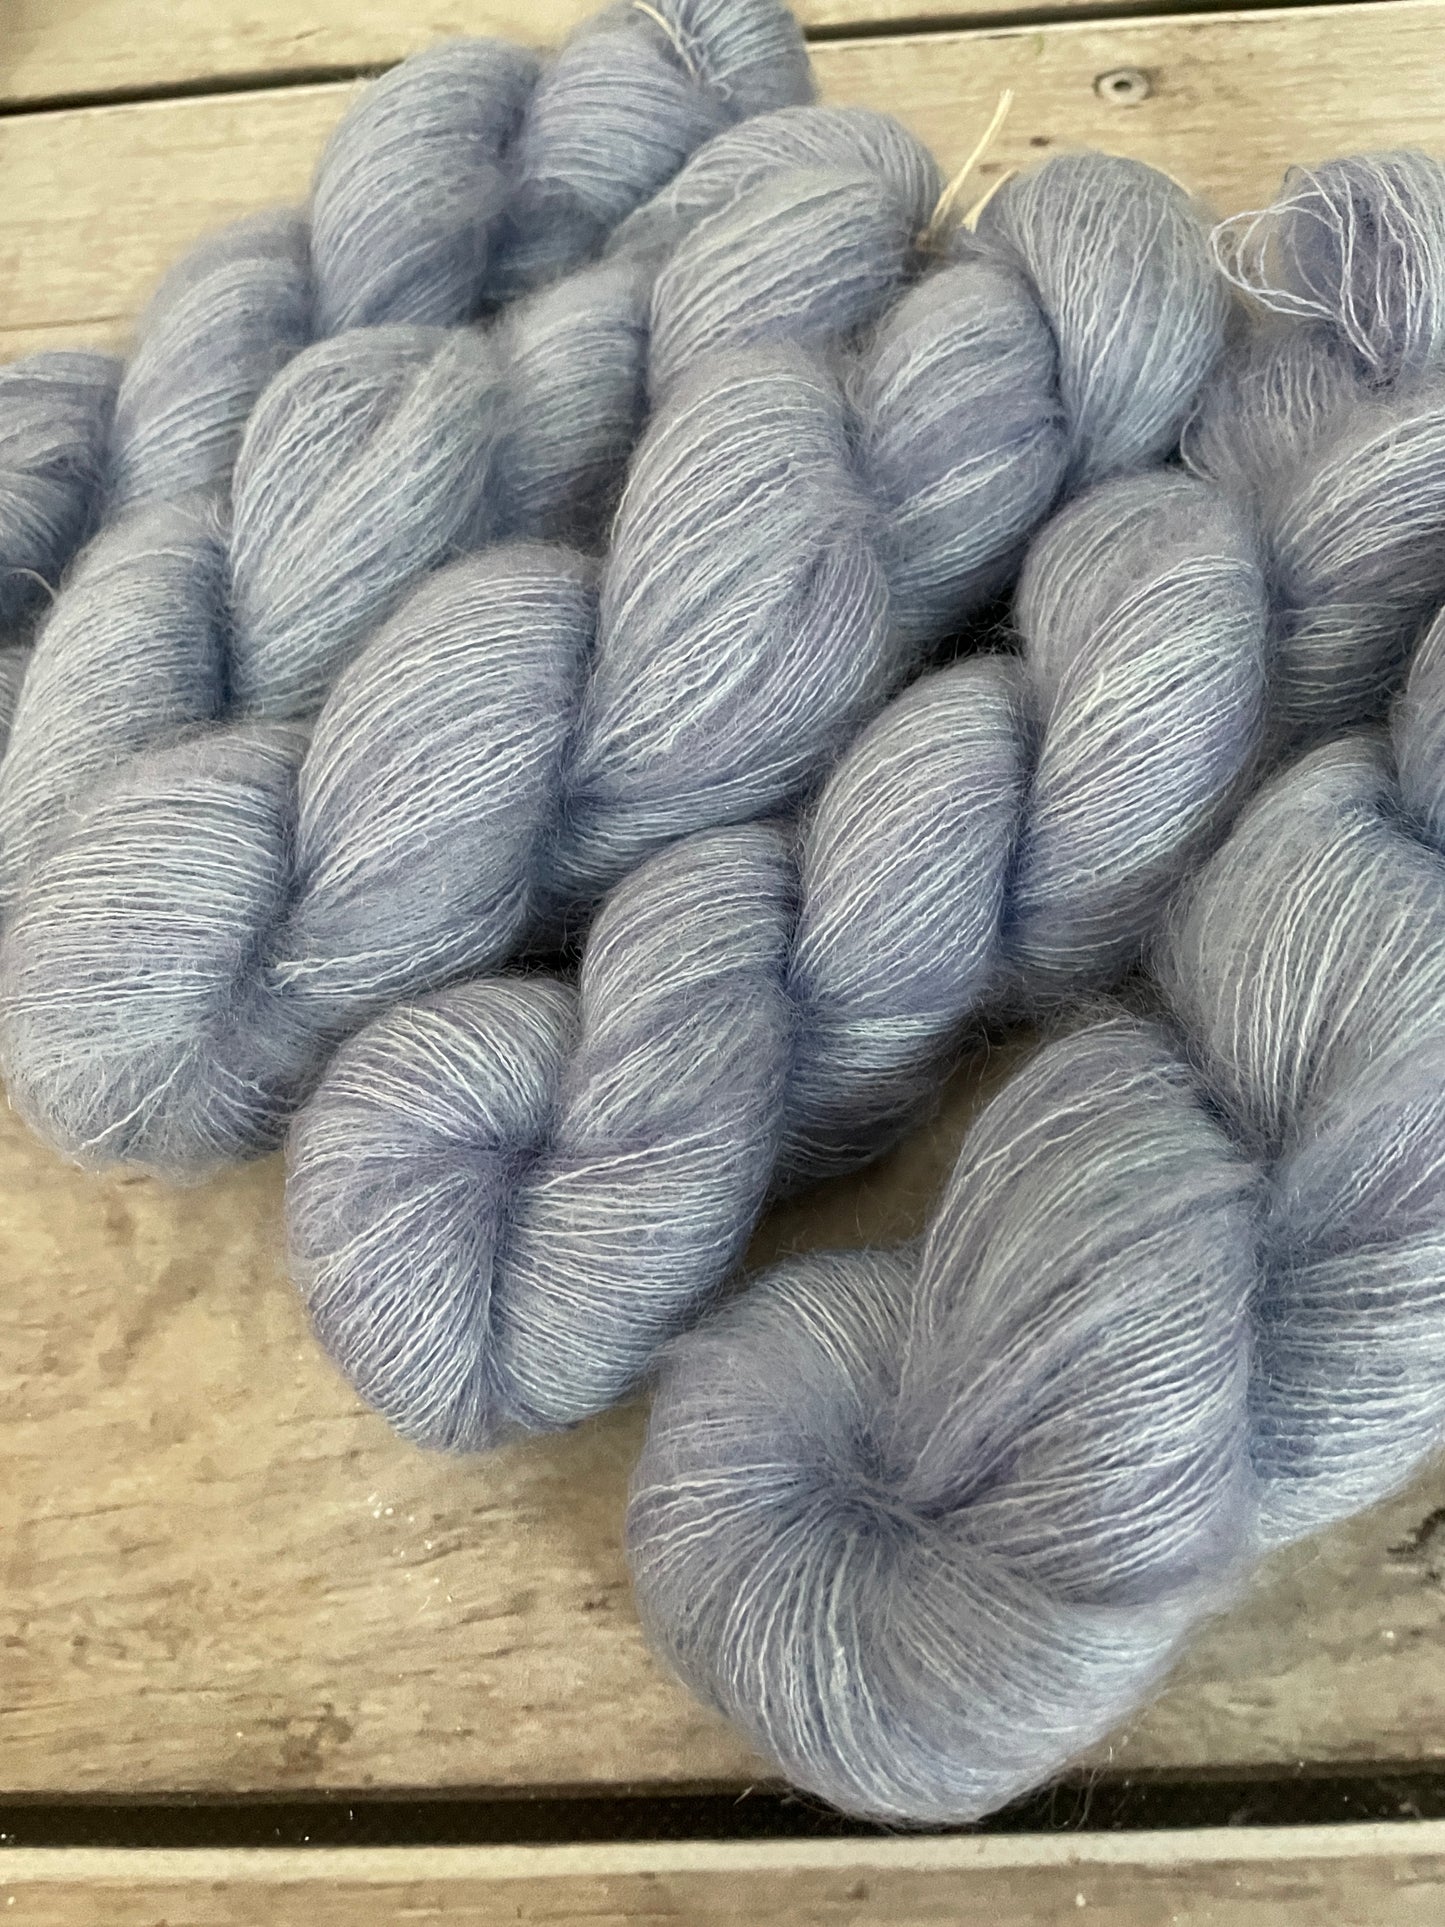 Delphinium - on Shui Yun - Silk and Mohair - lace, 2 ply